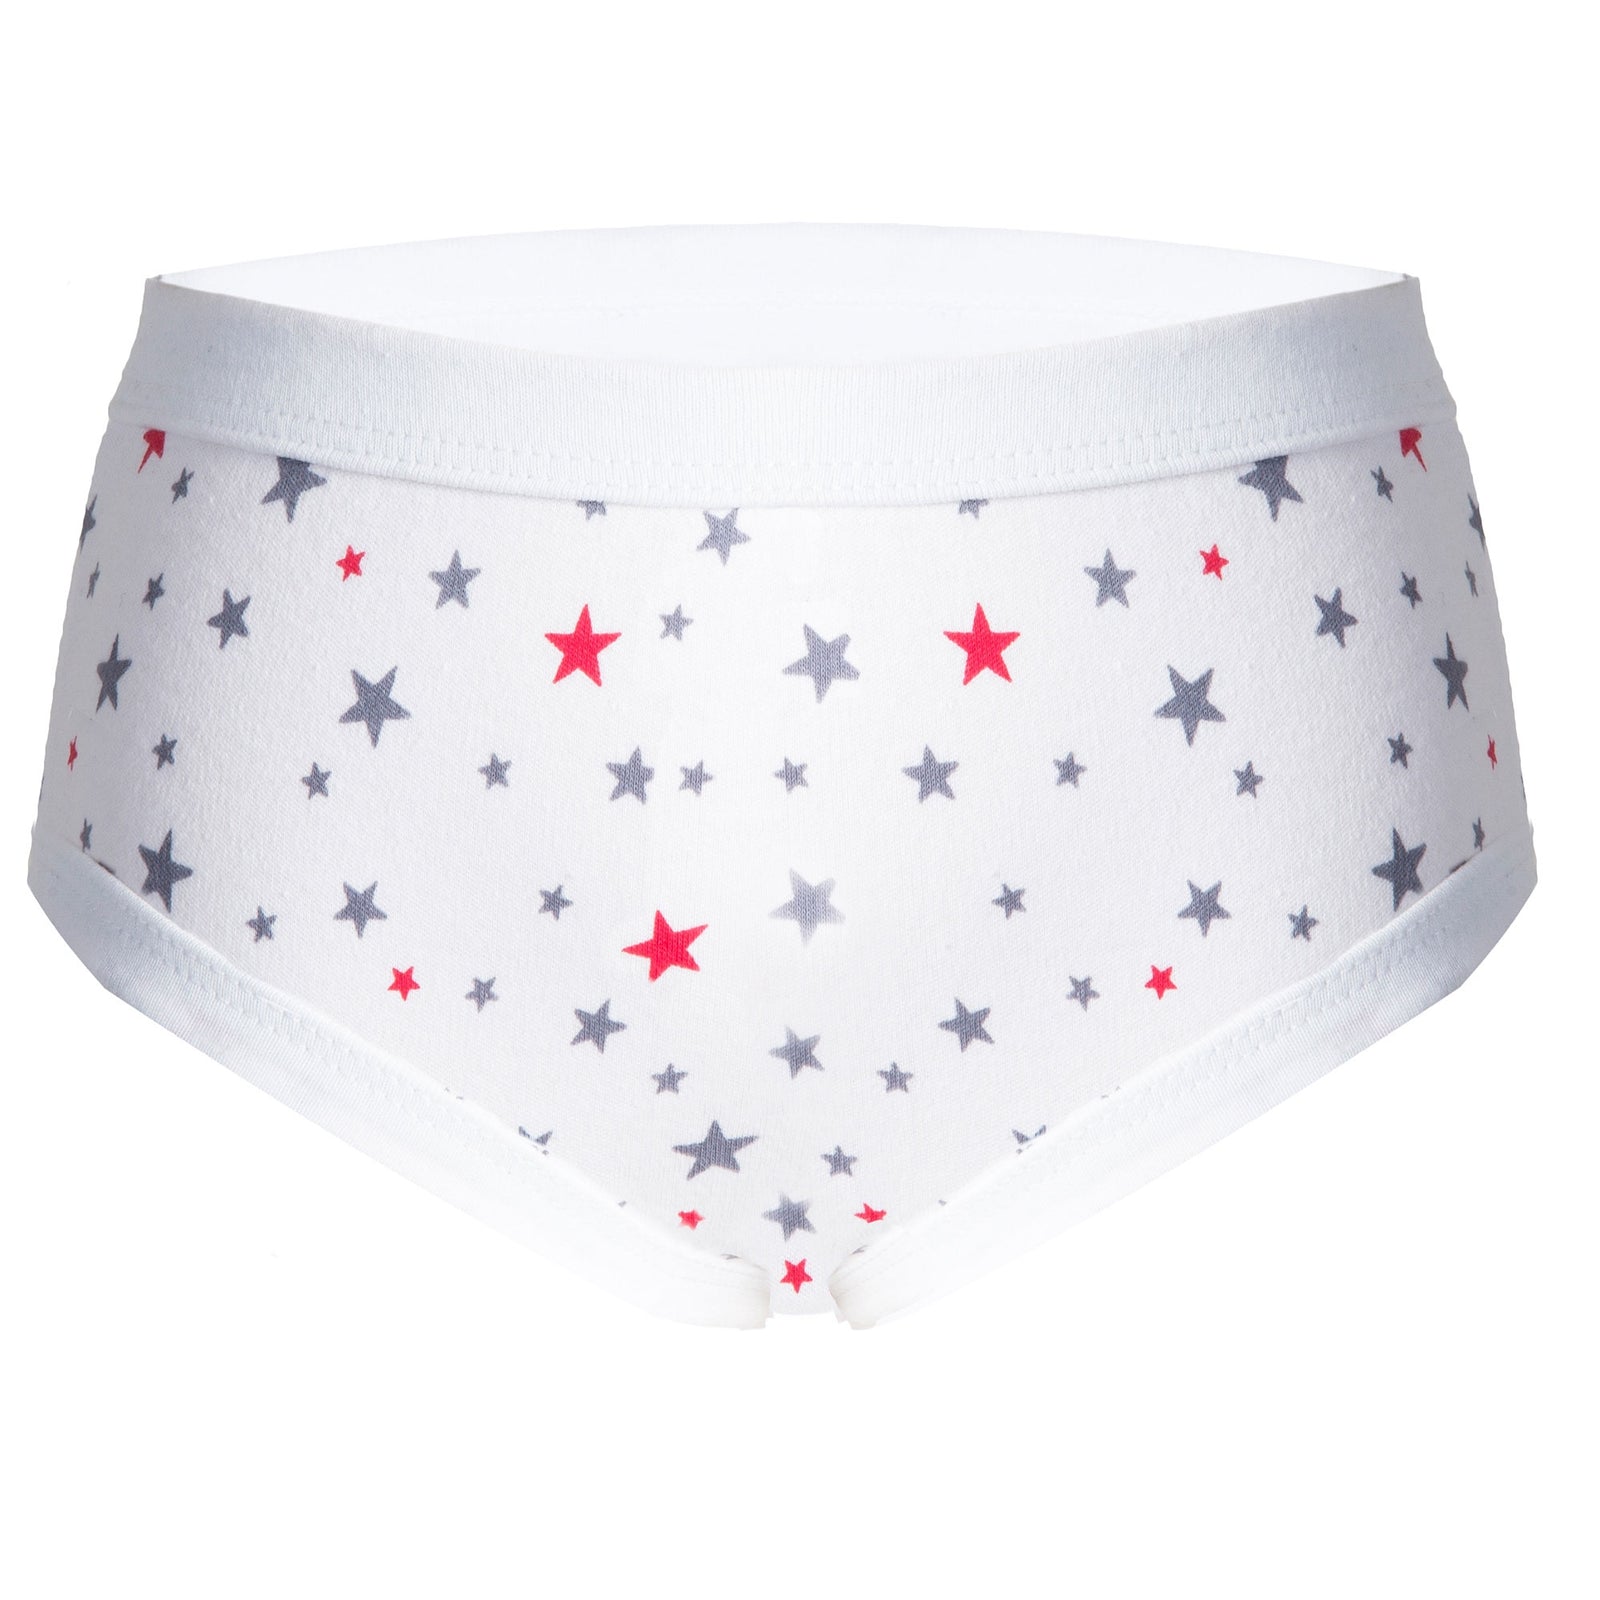 Reusable Briefs - National Incontinence